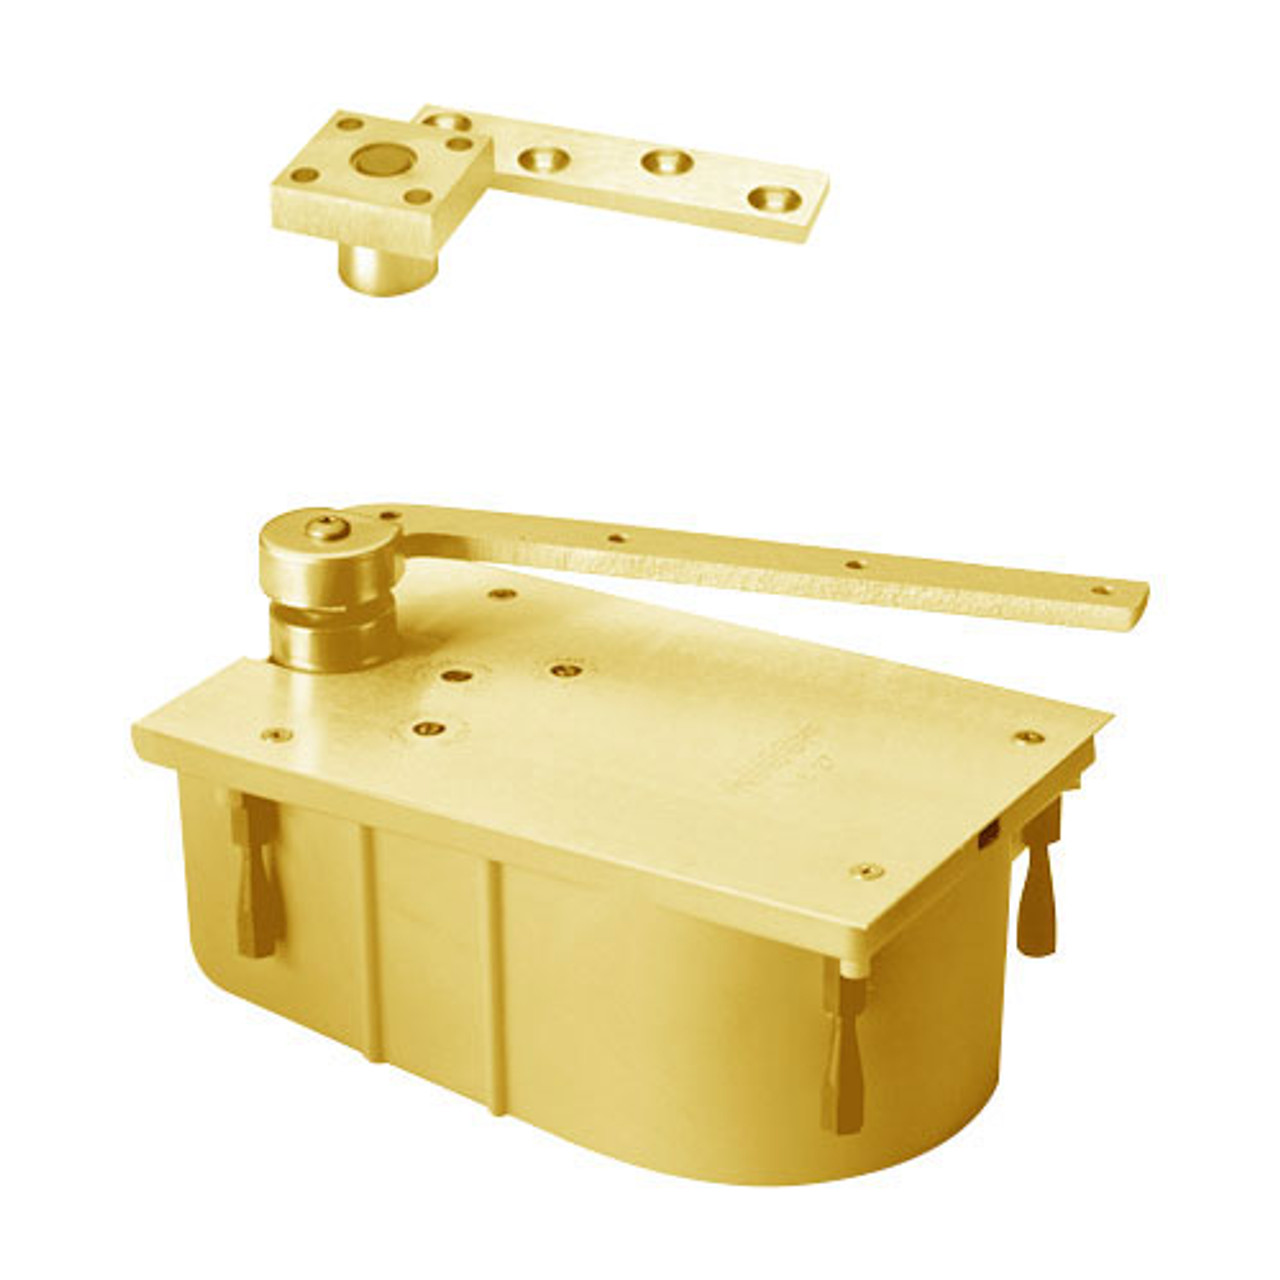 427-90S-LH-605 Rixson 427 Series Heavy Duty 3/4" Offset Hung Floor Closer in Bright Brass Finish